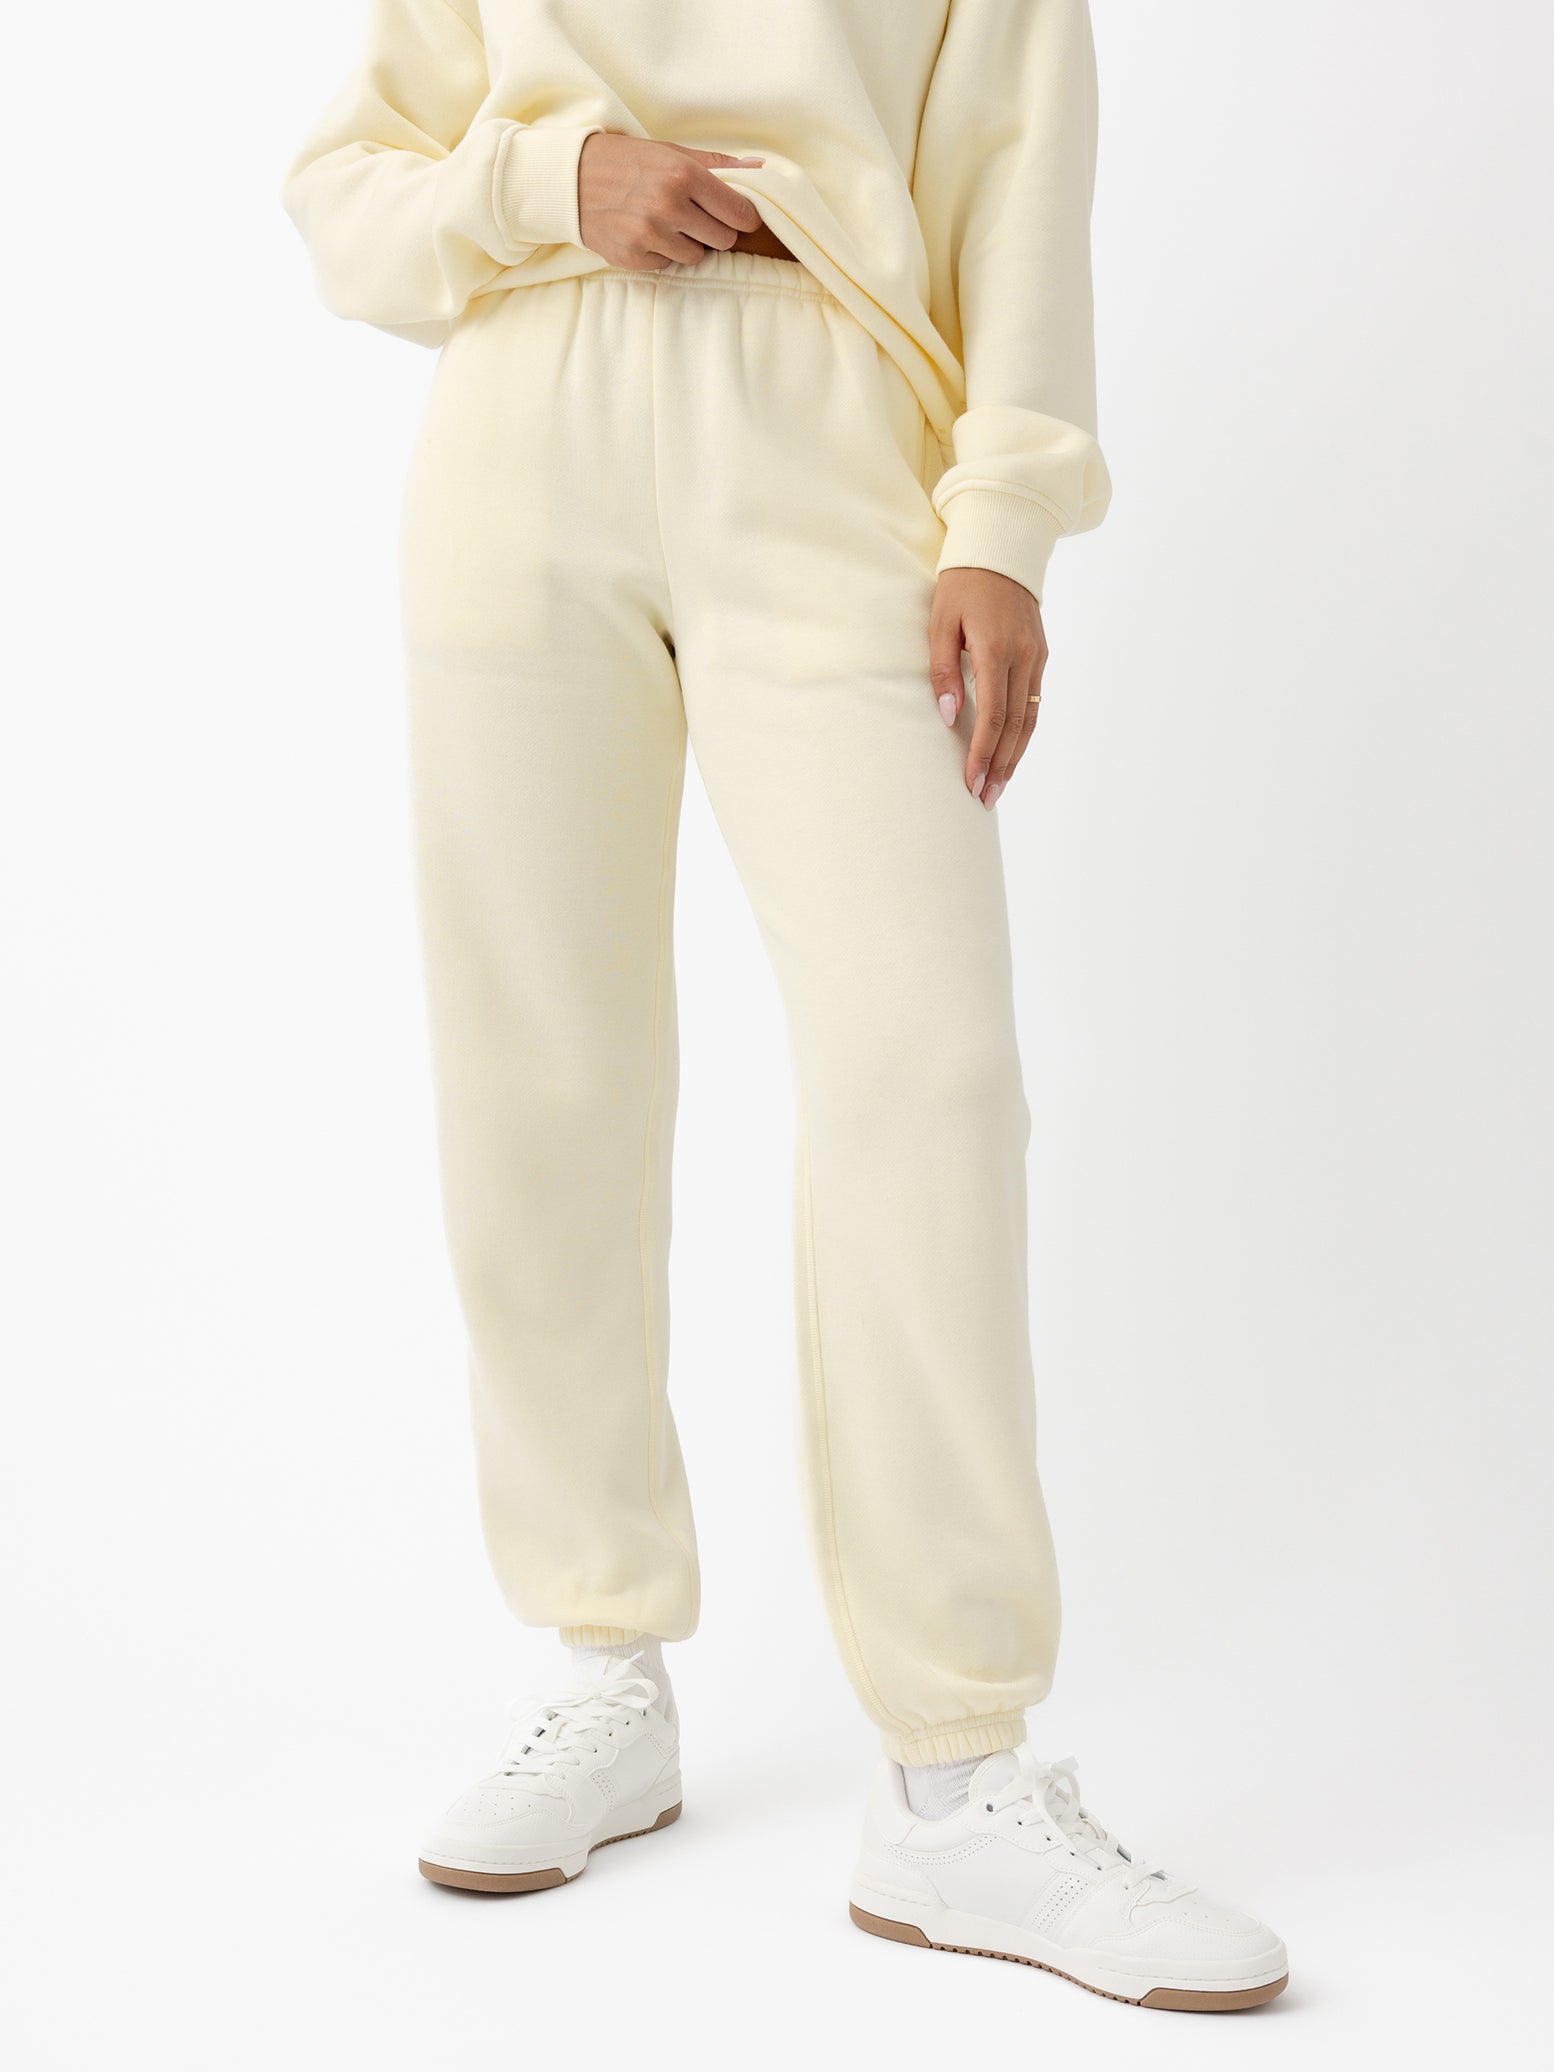 lemonade CityScape Joggers. The Joggers are being worn by a female model. The photo is taken from the waist down with the models hand by the pocket of the joggers. The back ground is white. 